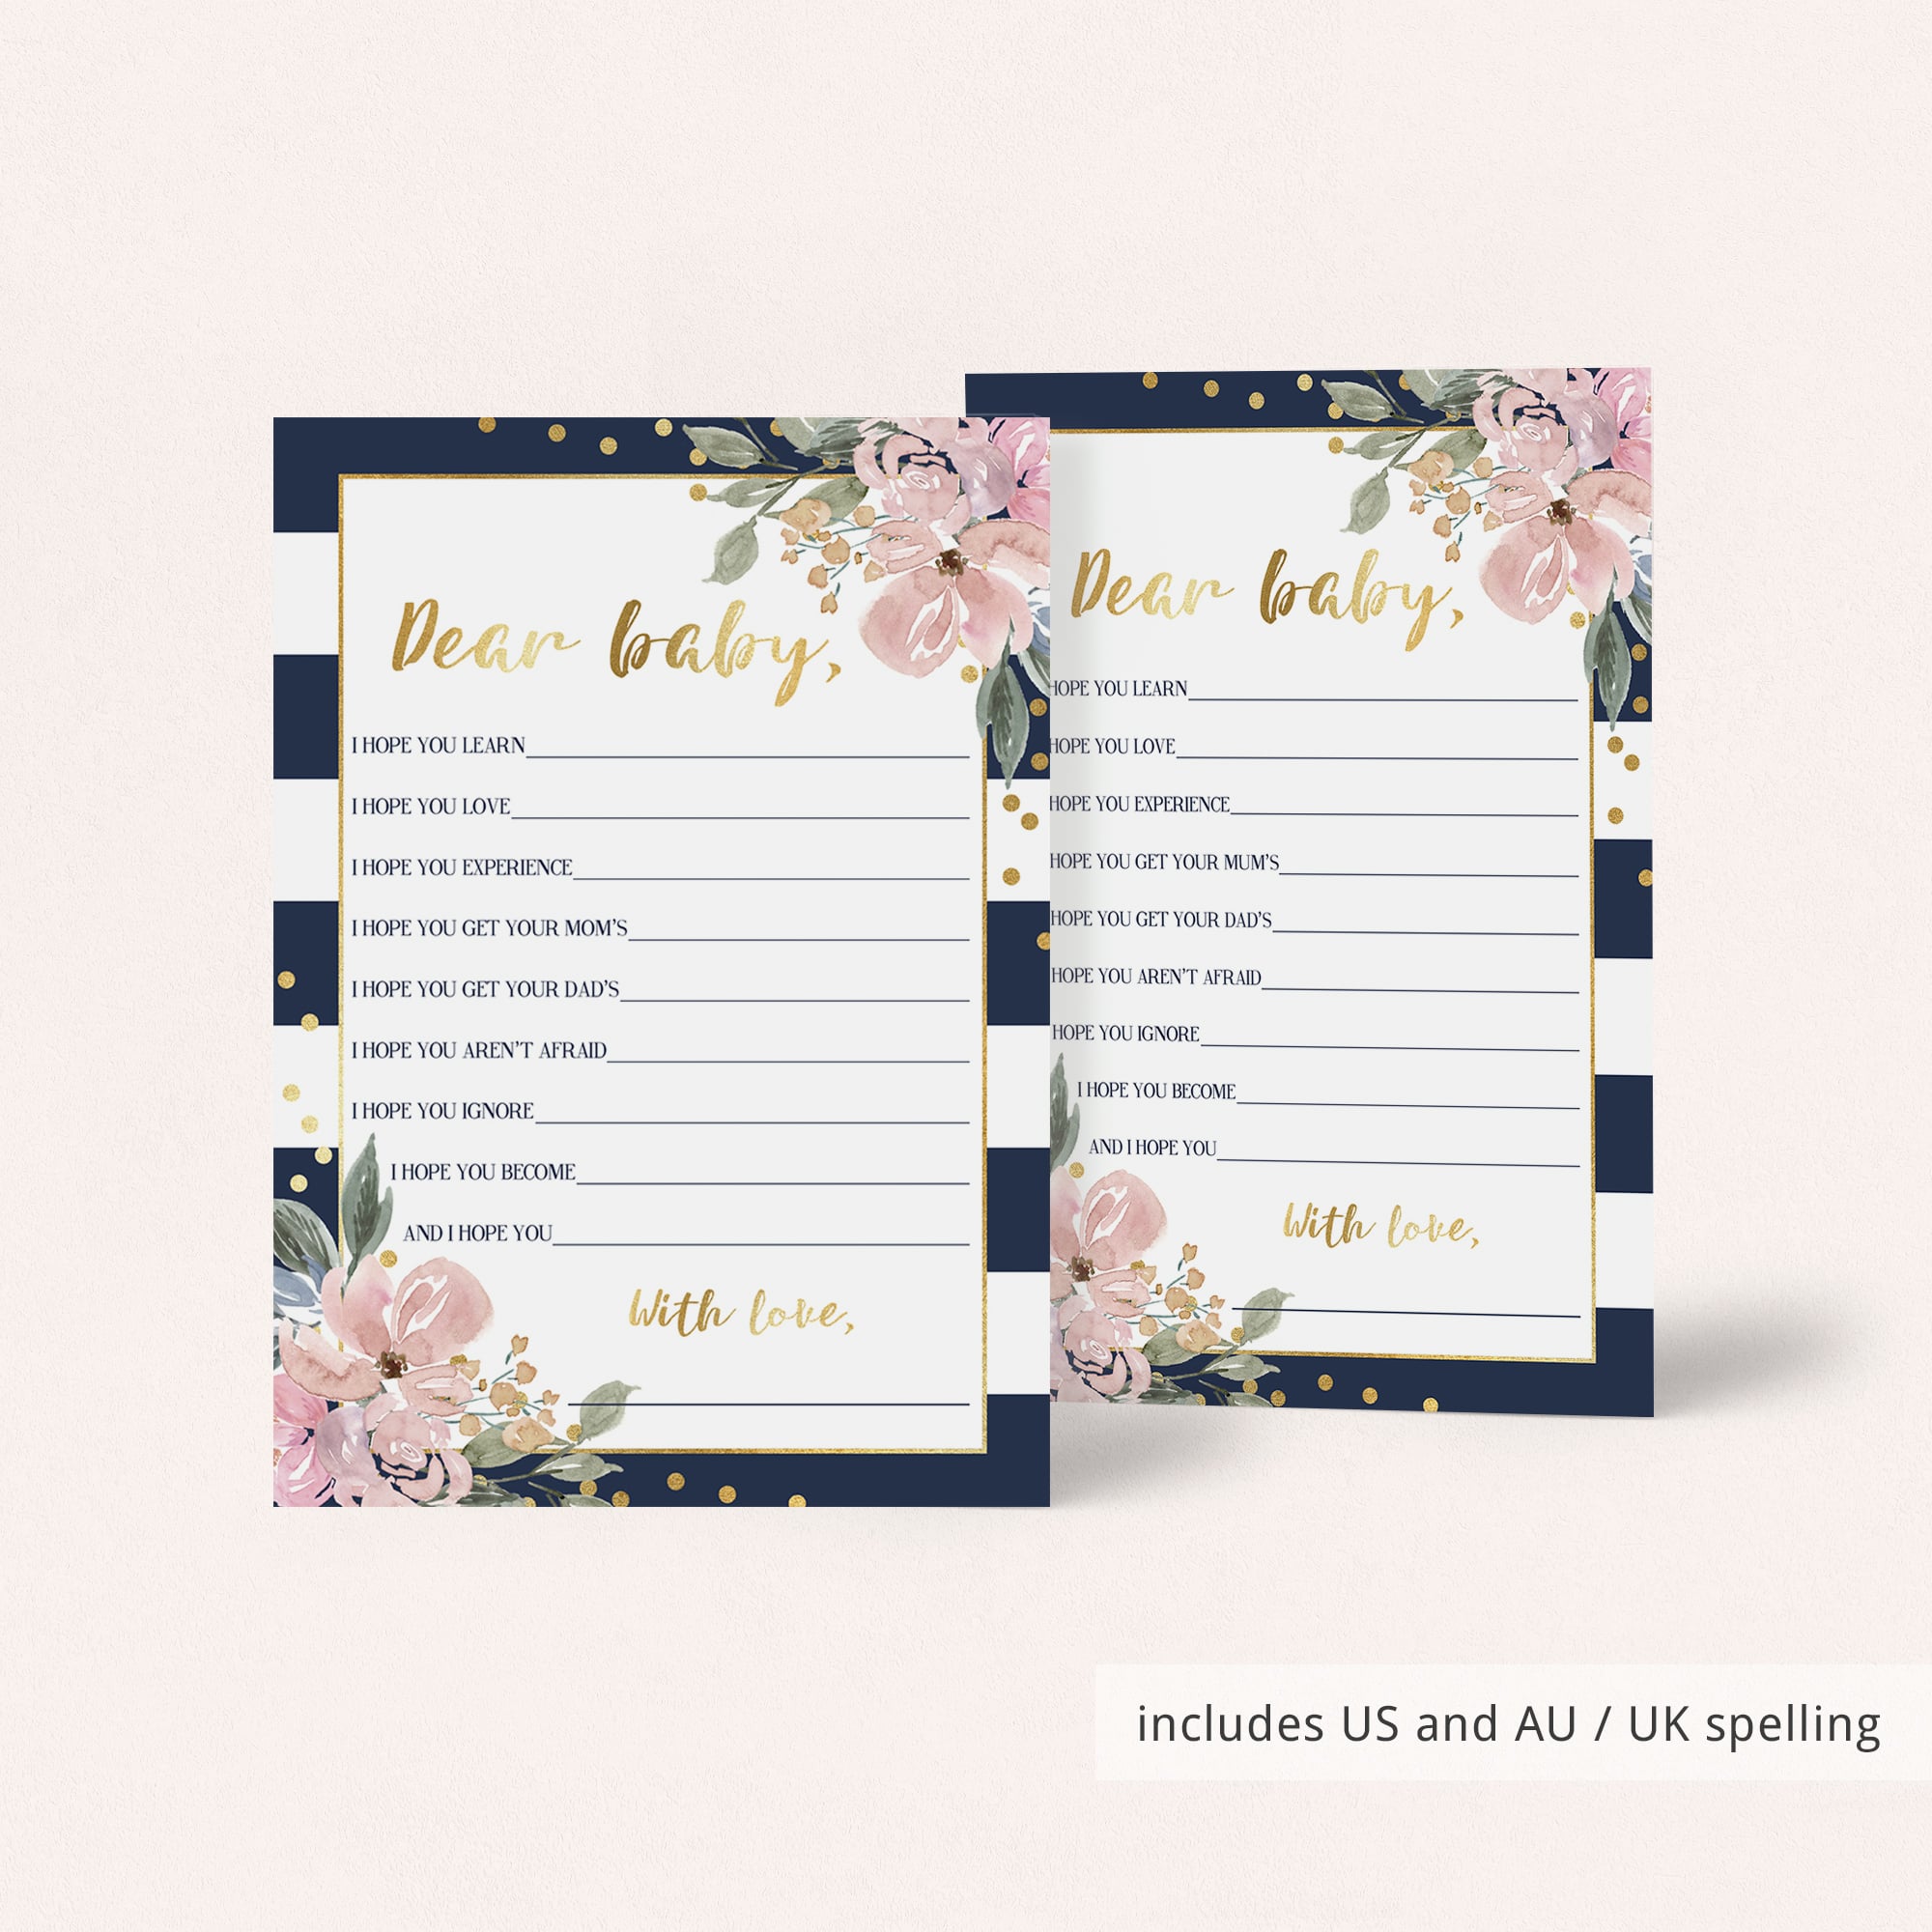 Printable games for navy and gold themed baby showers by LittleSizzle